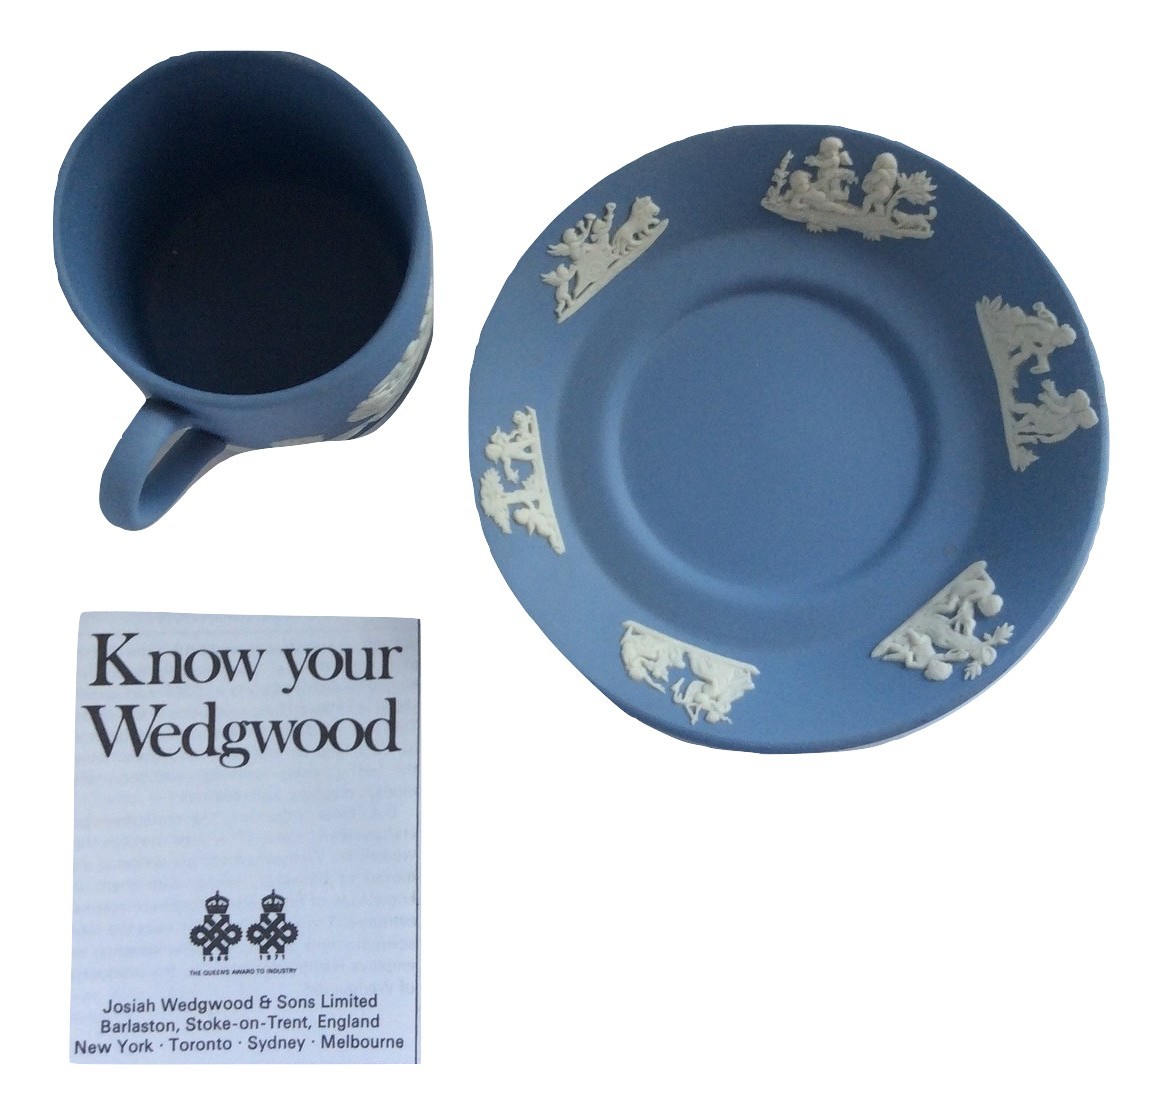 Wedge Wood Blue Chip Cup And Saucer Set - Multi-Color  New Still In Box  - $20.00